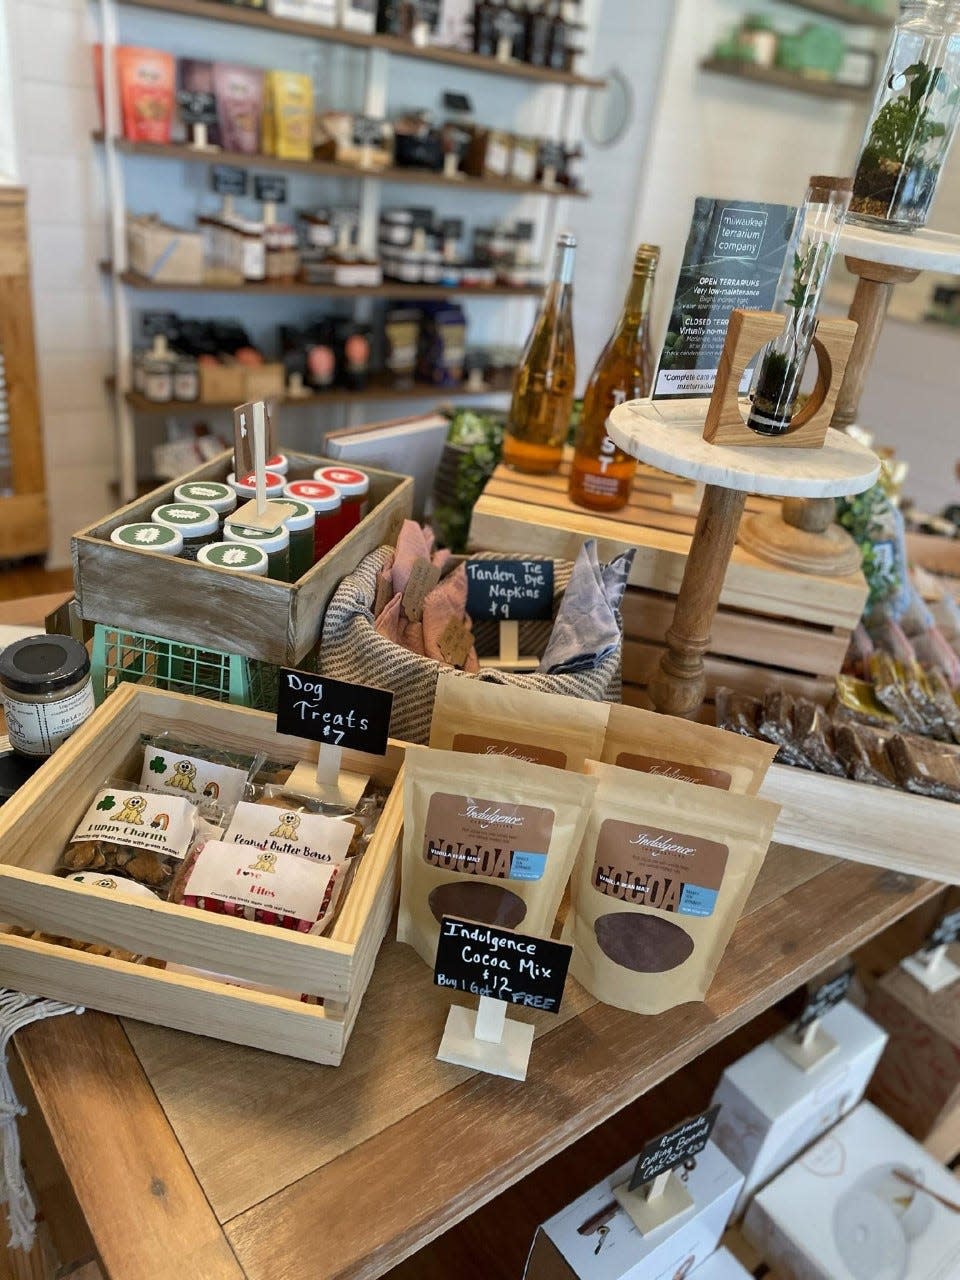 Locally made items at Frannie's Market range from hot cocoa and crackers to dog treats.